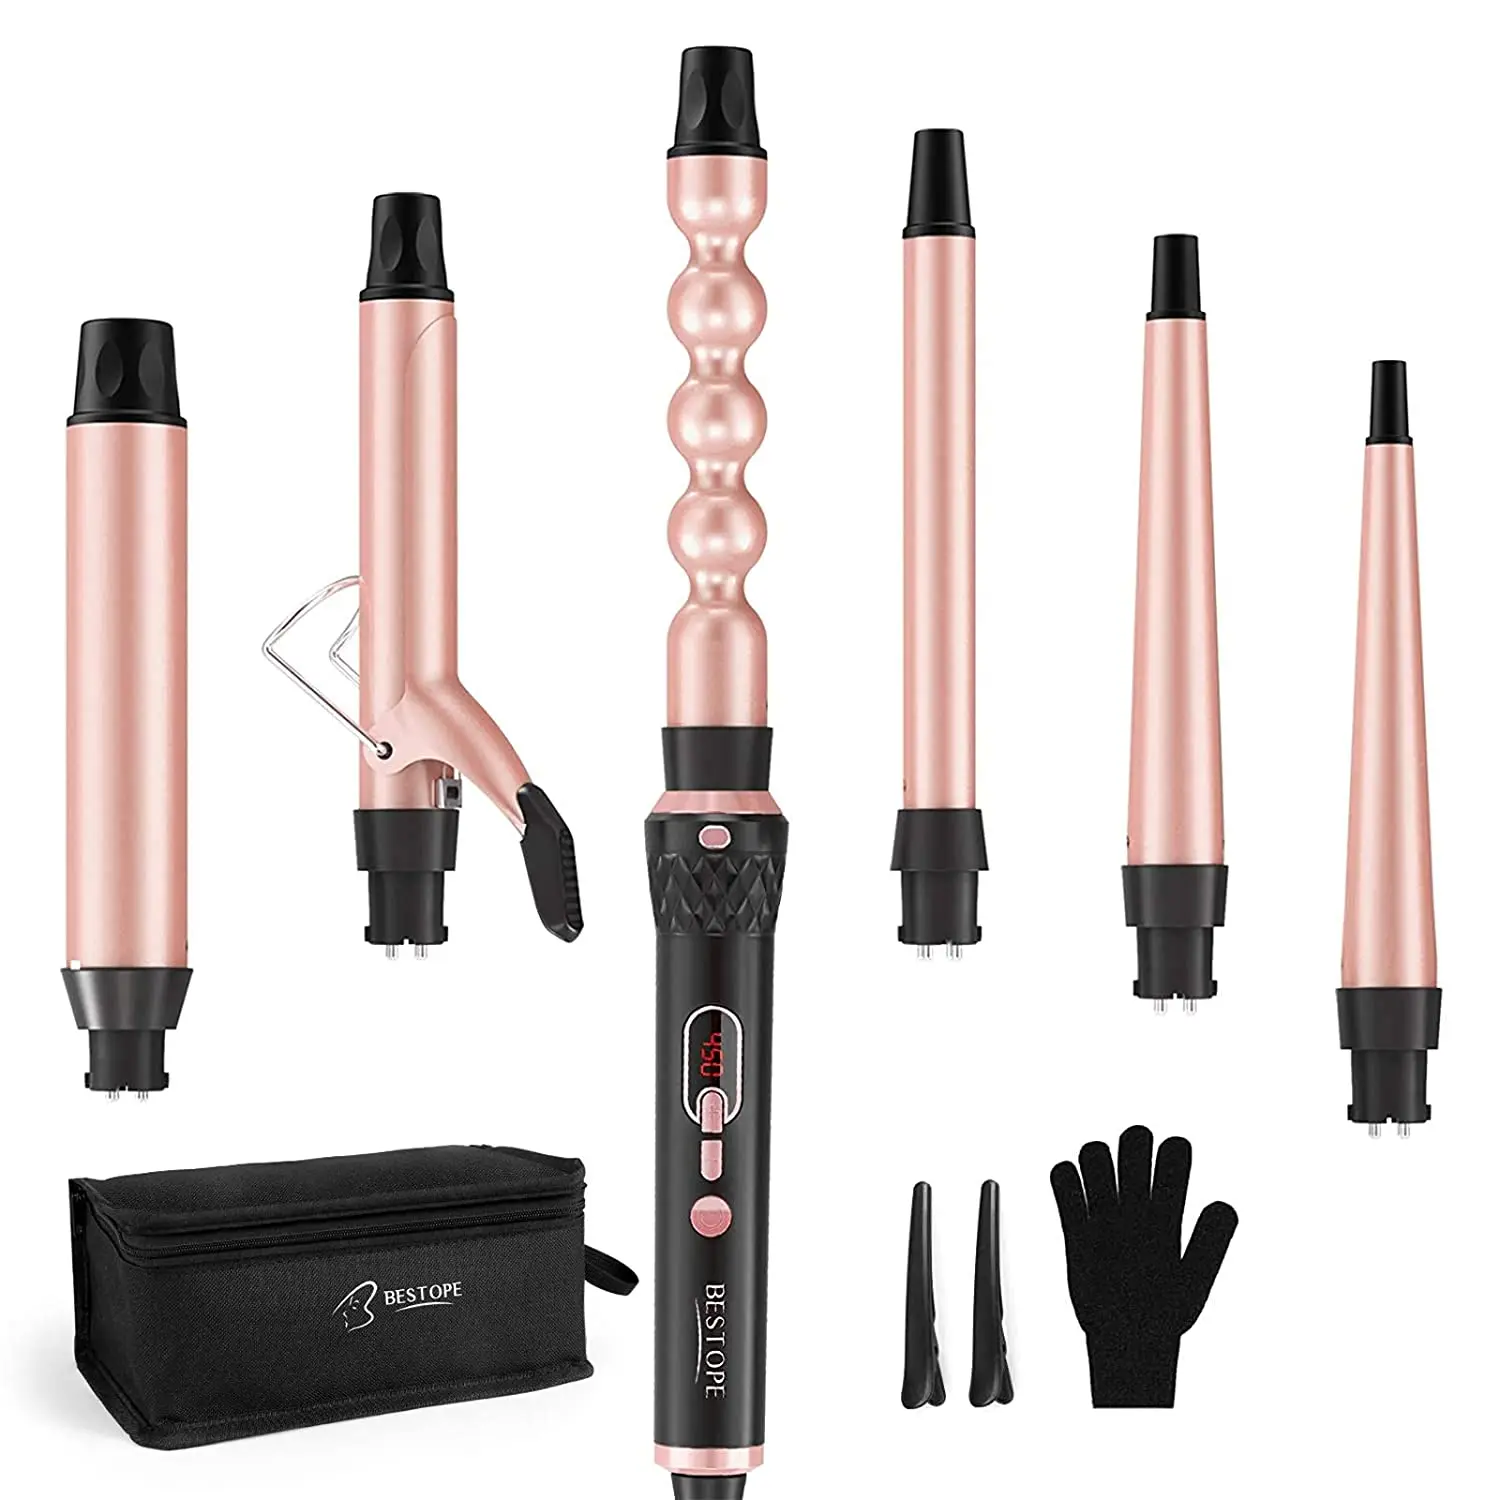 Bestope 6 In 1 Interchangeable Curling Wand Set Led Display Set Ceramic  Professional Hair Curling Iron - Buy Curling Iron,Professional Iron Hair,Ceramic  Curling Iron Product on 